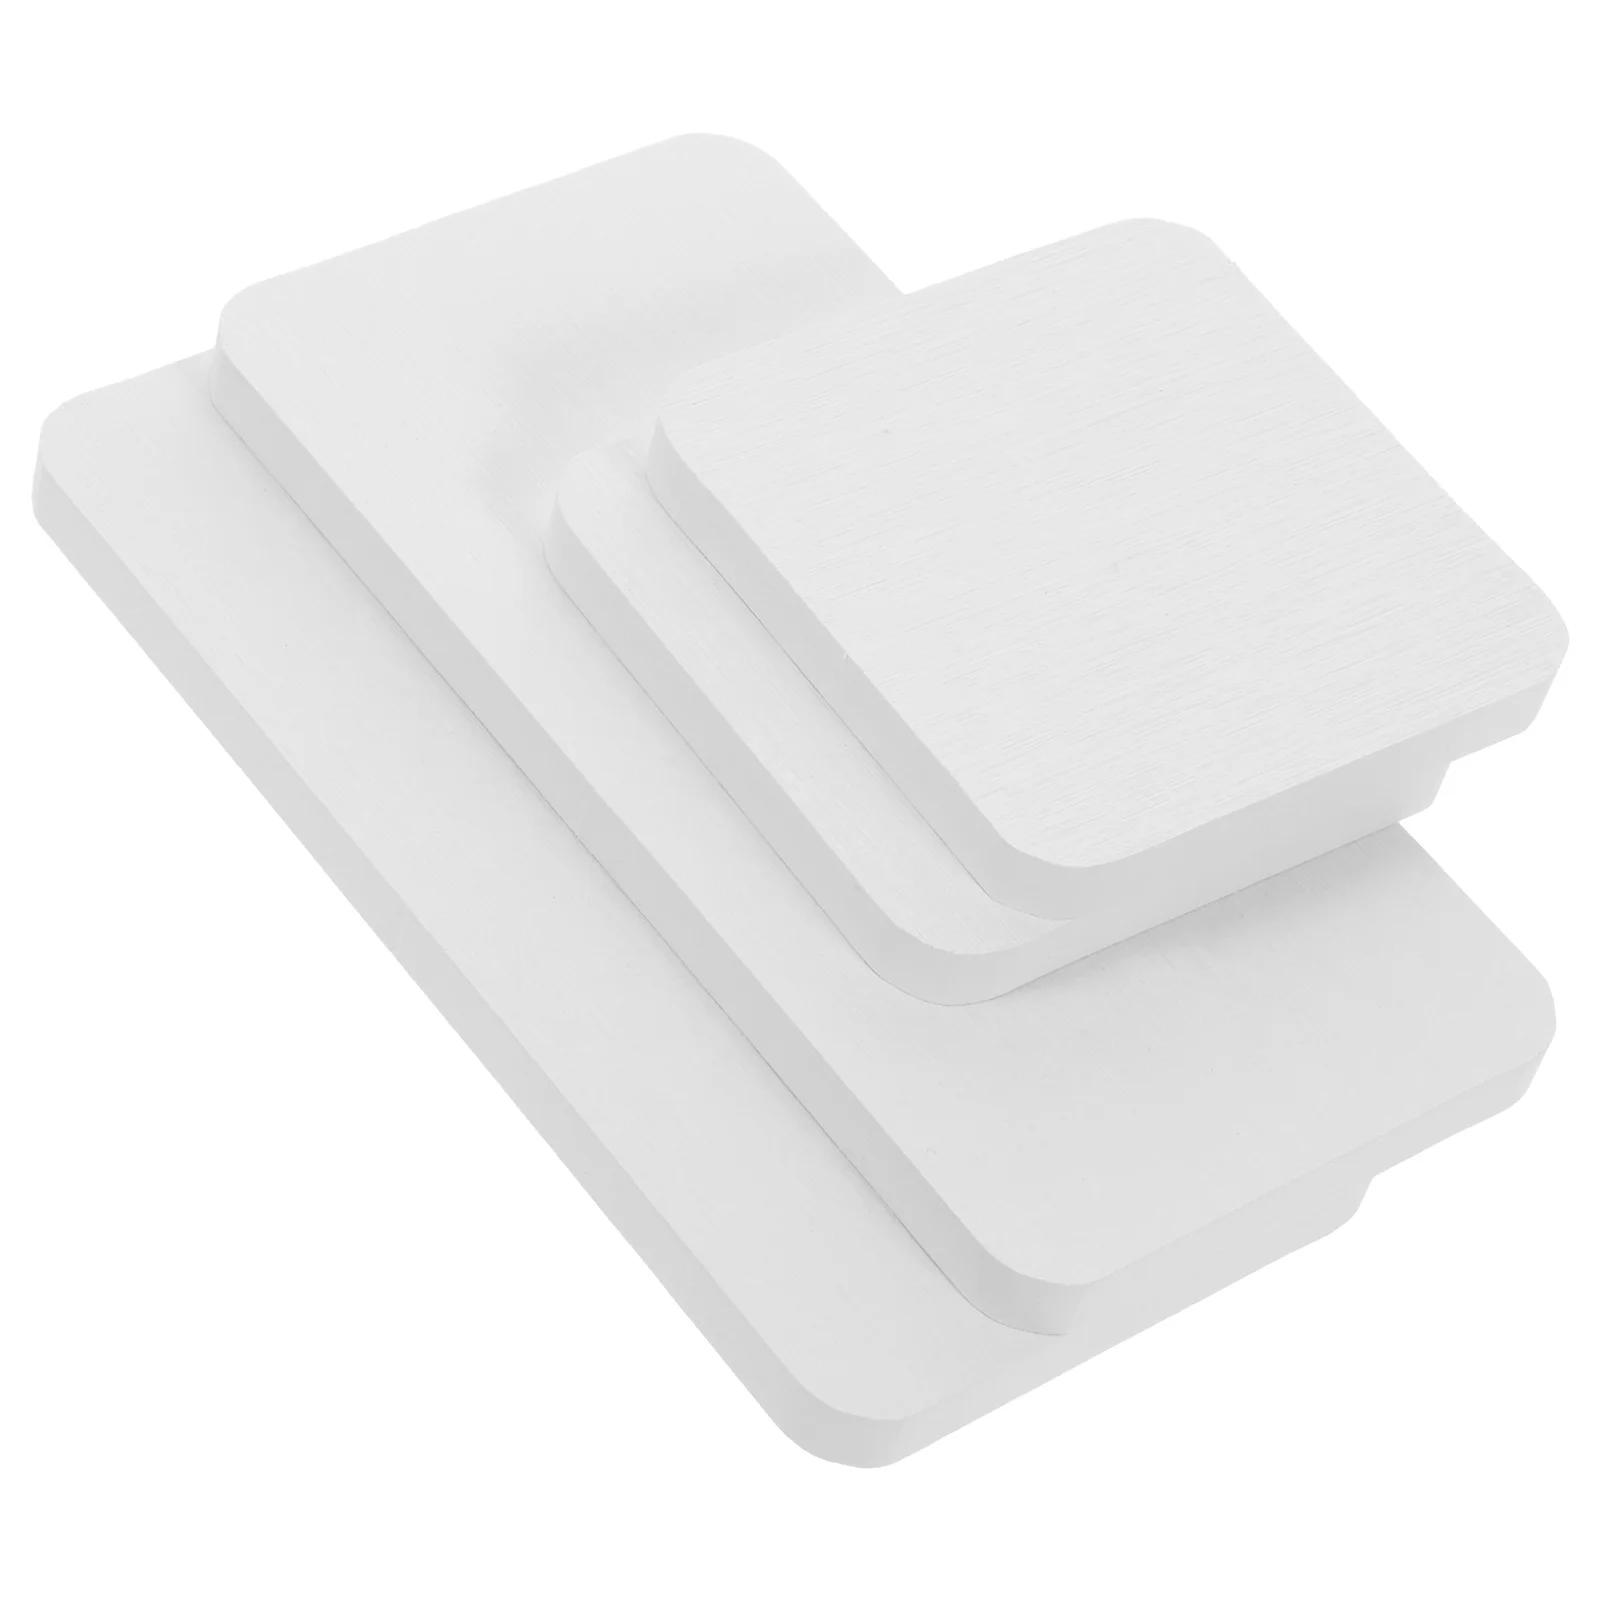 

Water Absorbent Diatomite Coasters Soap Holder Water Drying Soap Dish Cup Pads Absorbent Mat Absorbent Pads For Soap